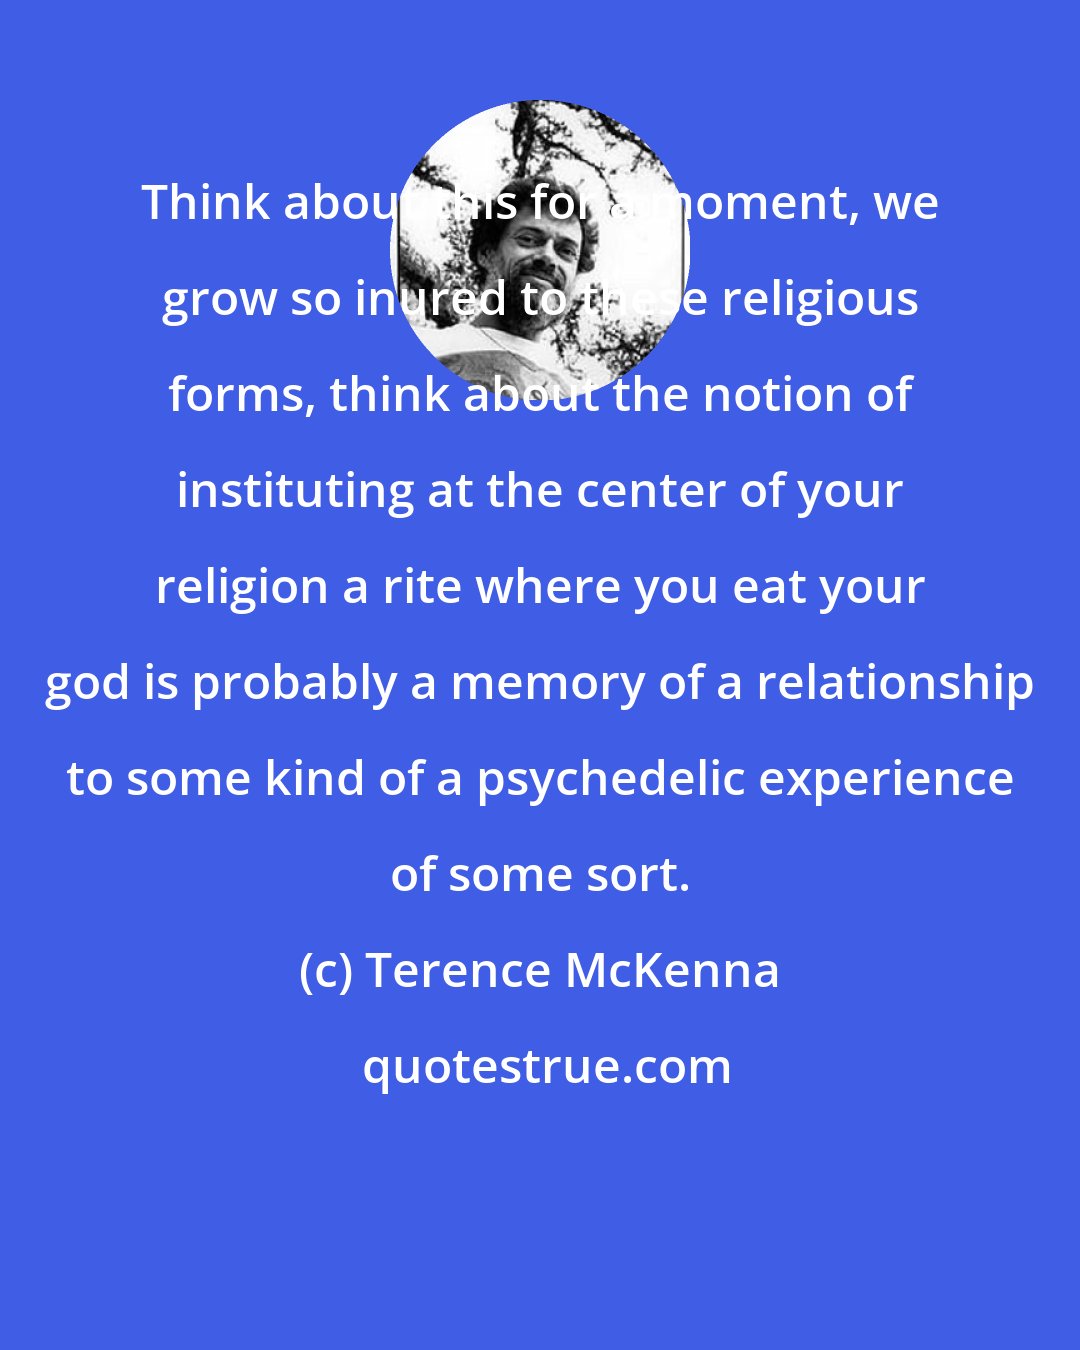 Terence McKenna: Think about this for a moment, we grow so inured to these religious forms, think about the notion of instituting at the center of your religion a rite where you eat your god is probably a memory of a relationship to some kind of a psychedelic experience of some sort.